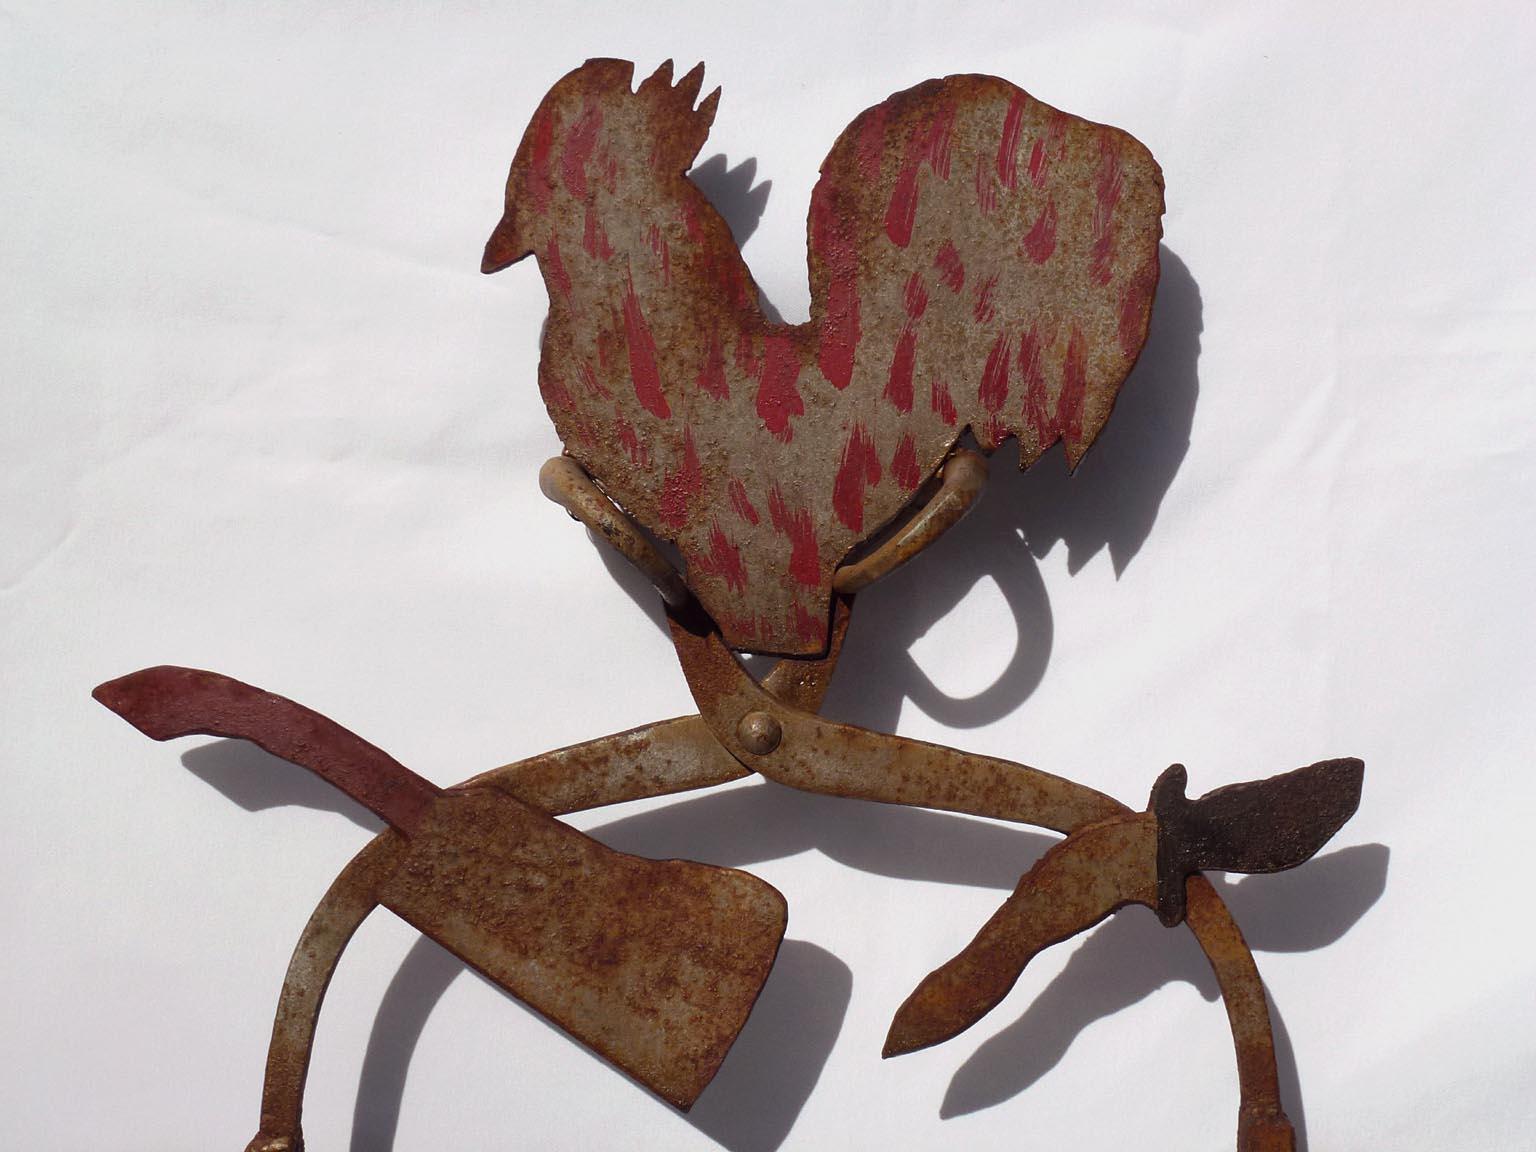 American Butcher's Trade Sign: Metal Tools, Found Objects, Ice Tongs, with Rooster on Top For Sale